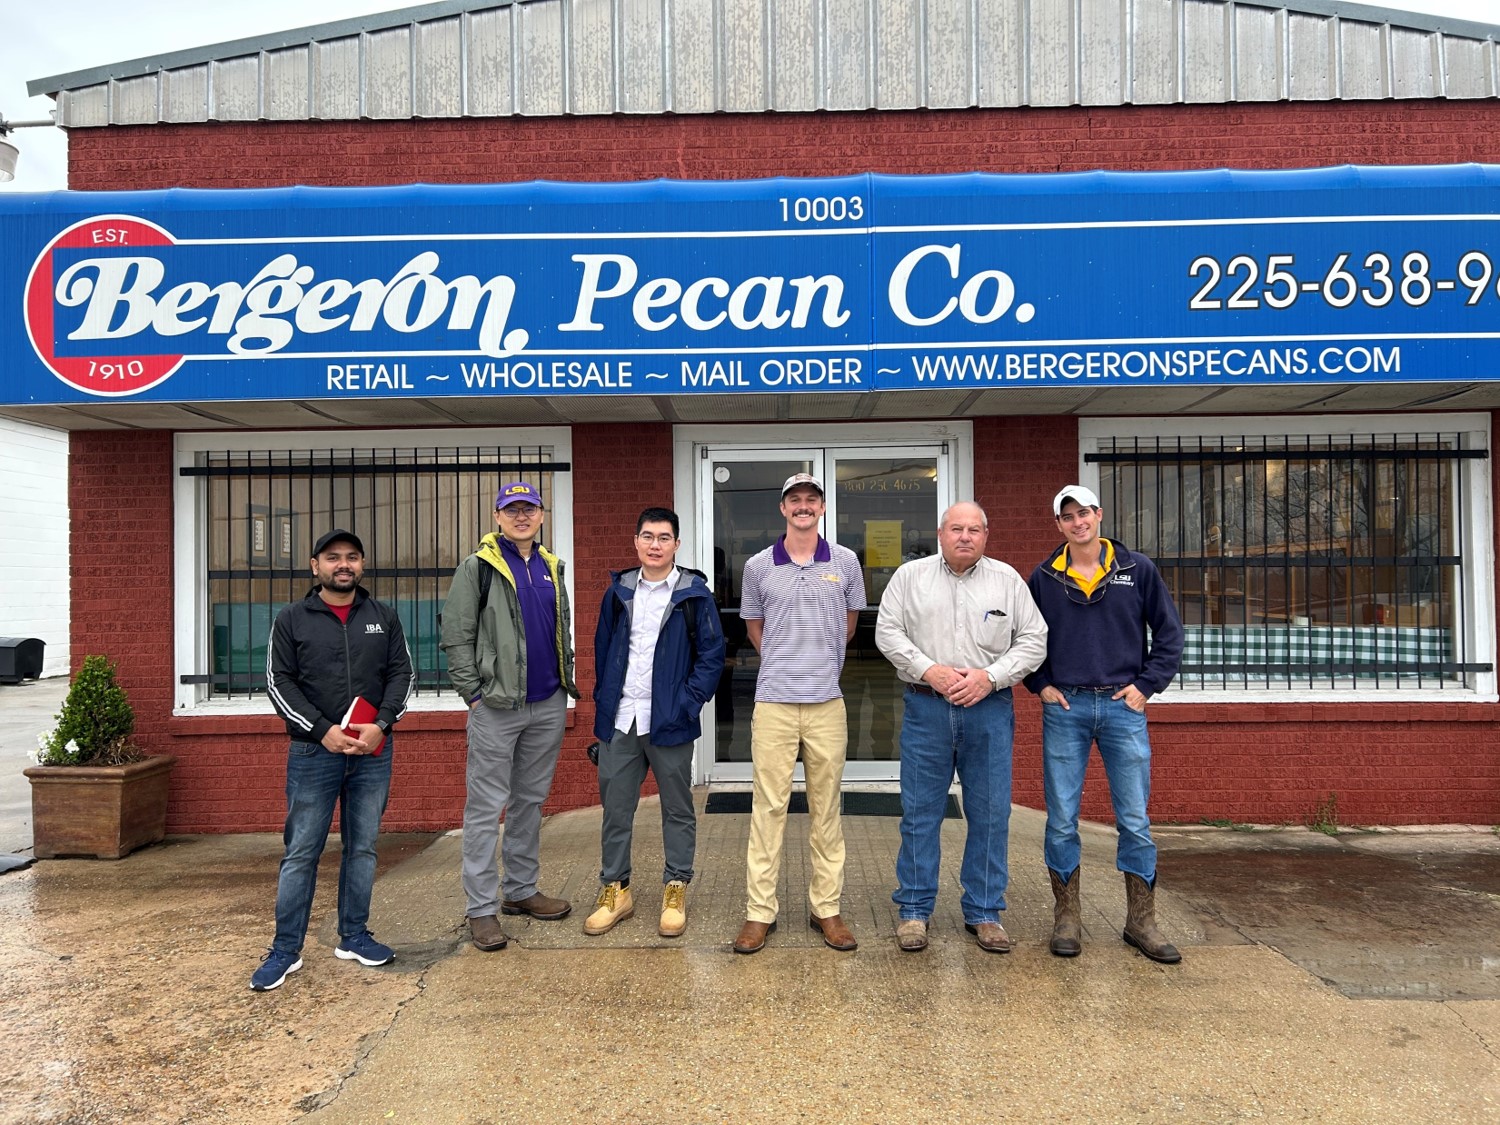 team picture from bergerons pecans